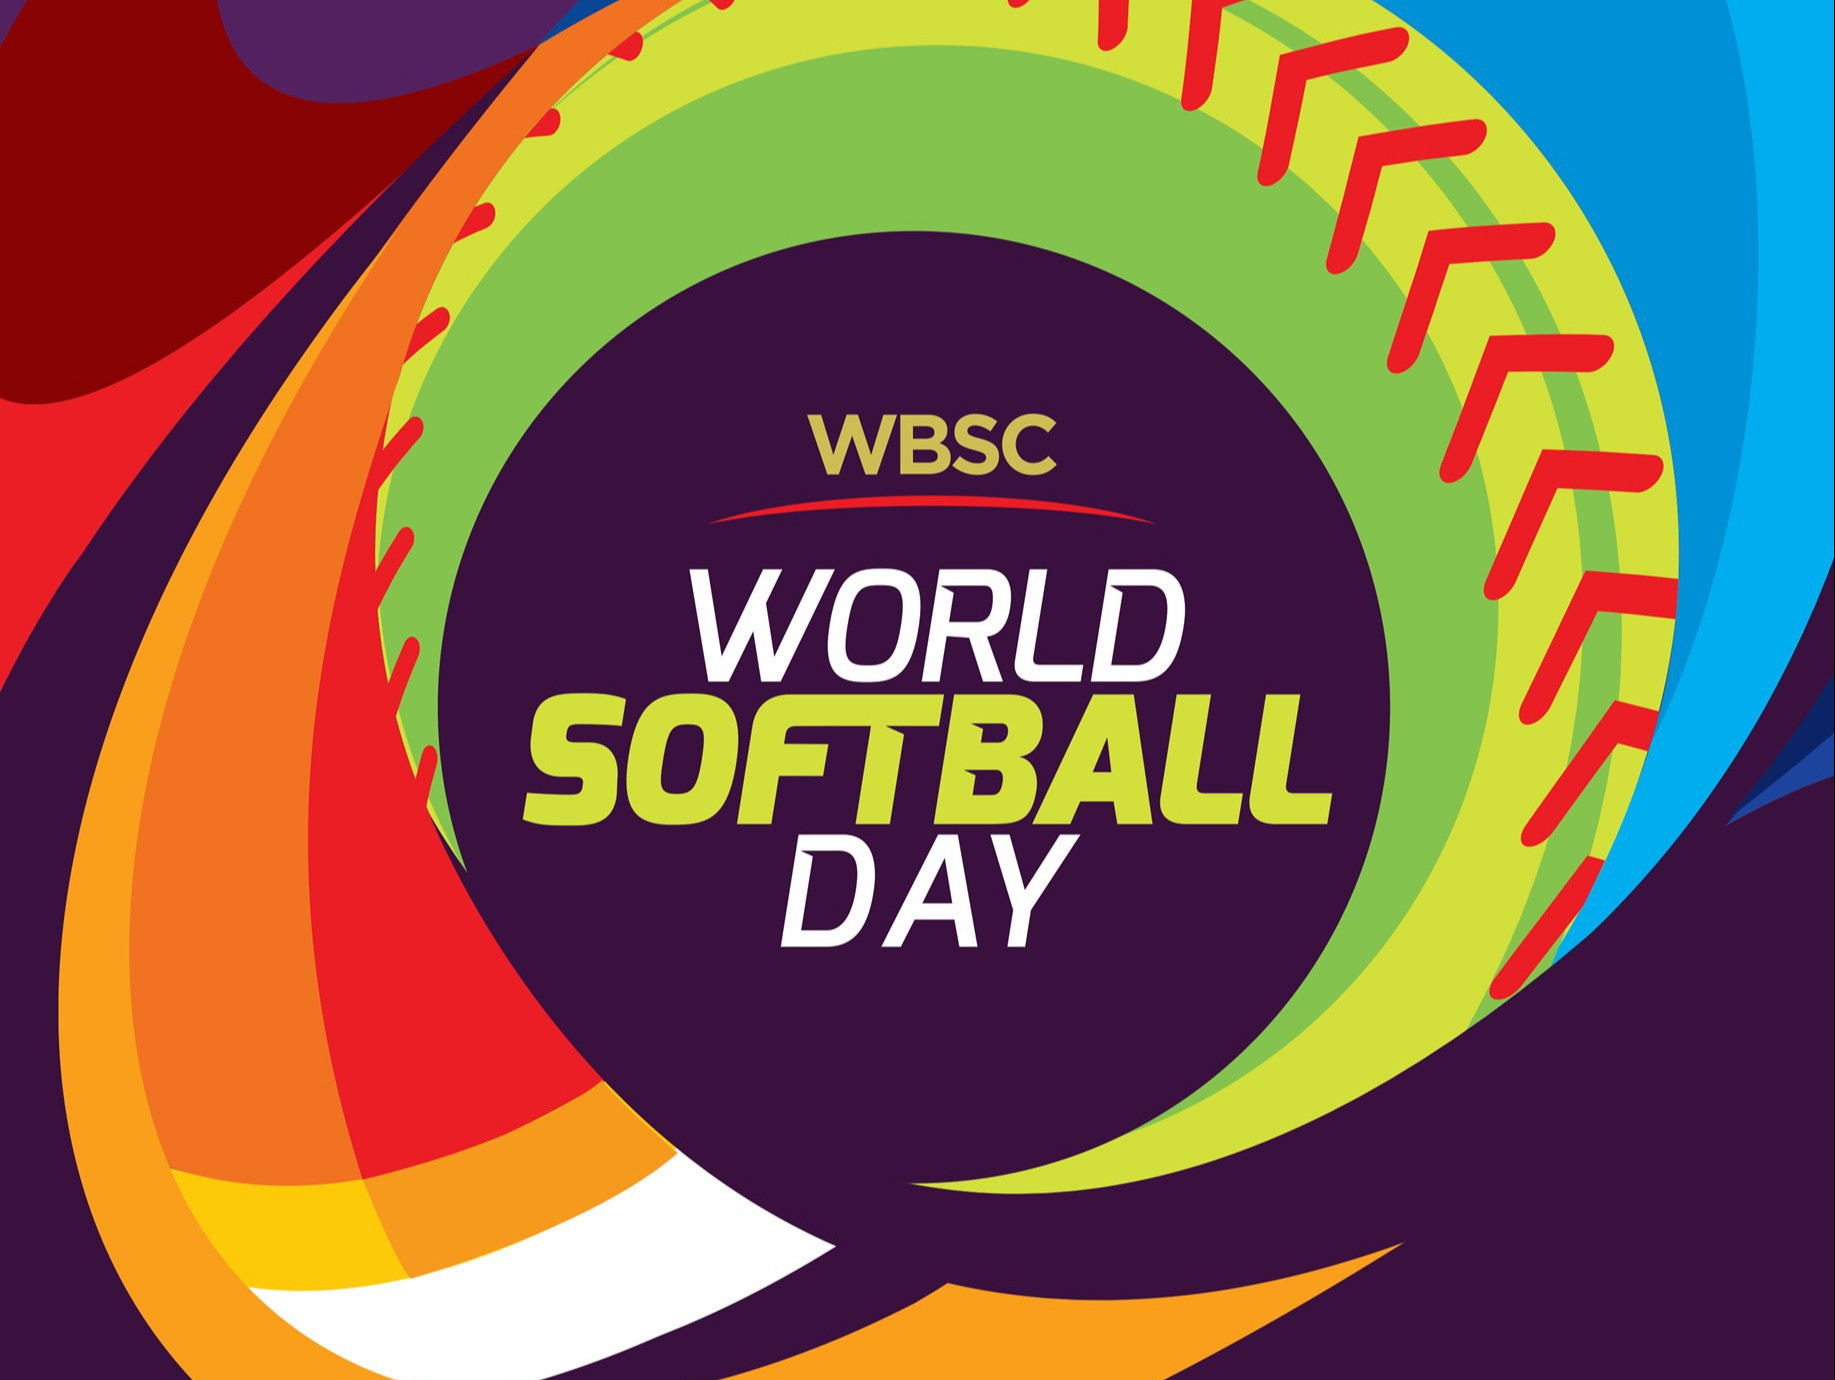 Today is World Softball Day ©WBSC